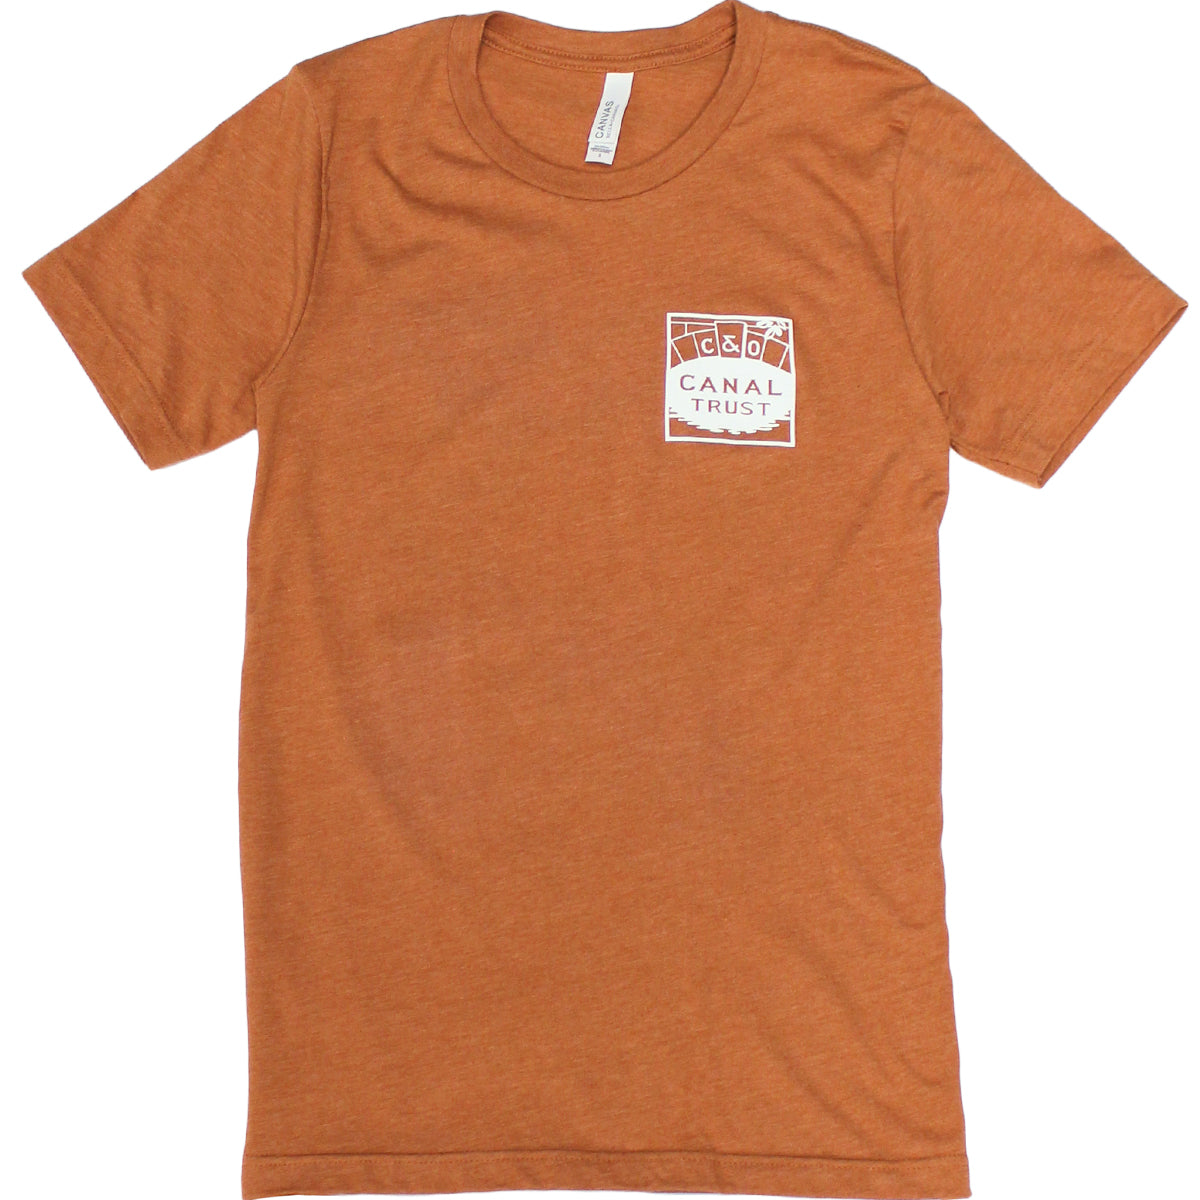 C&O Canal National Historical Park (Yam) / Shirt - Route One Apparel